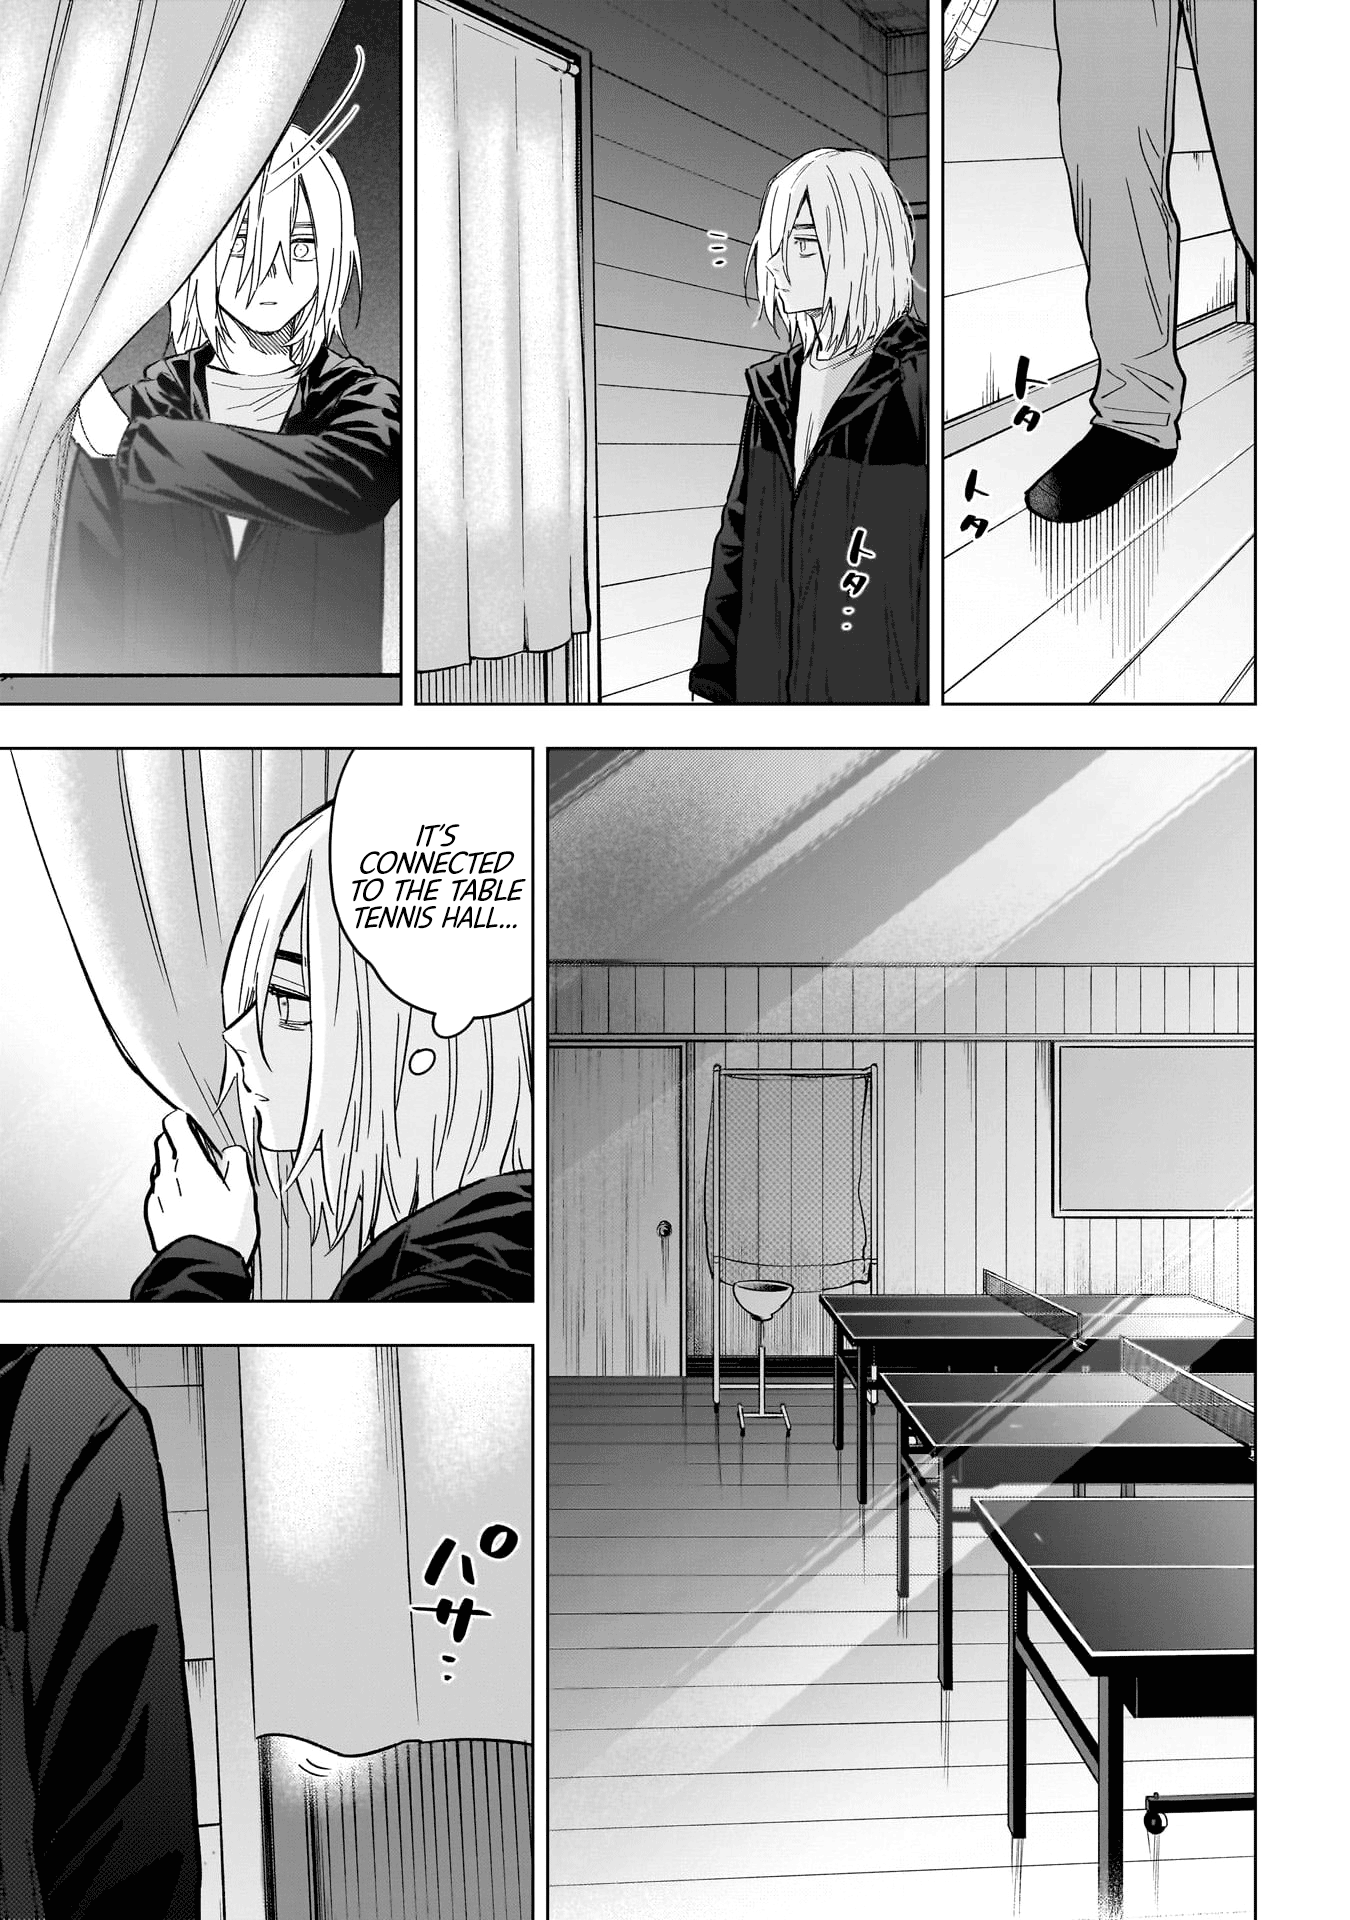 Boy’s Abyss, chapter 166